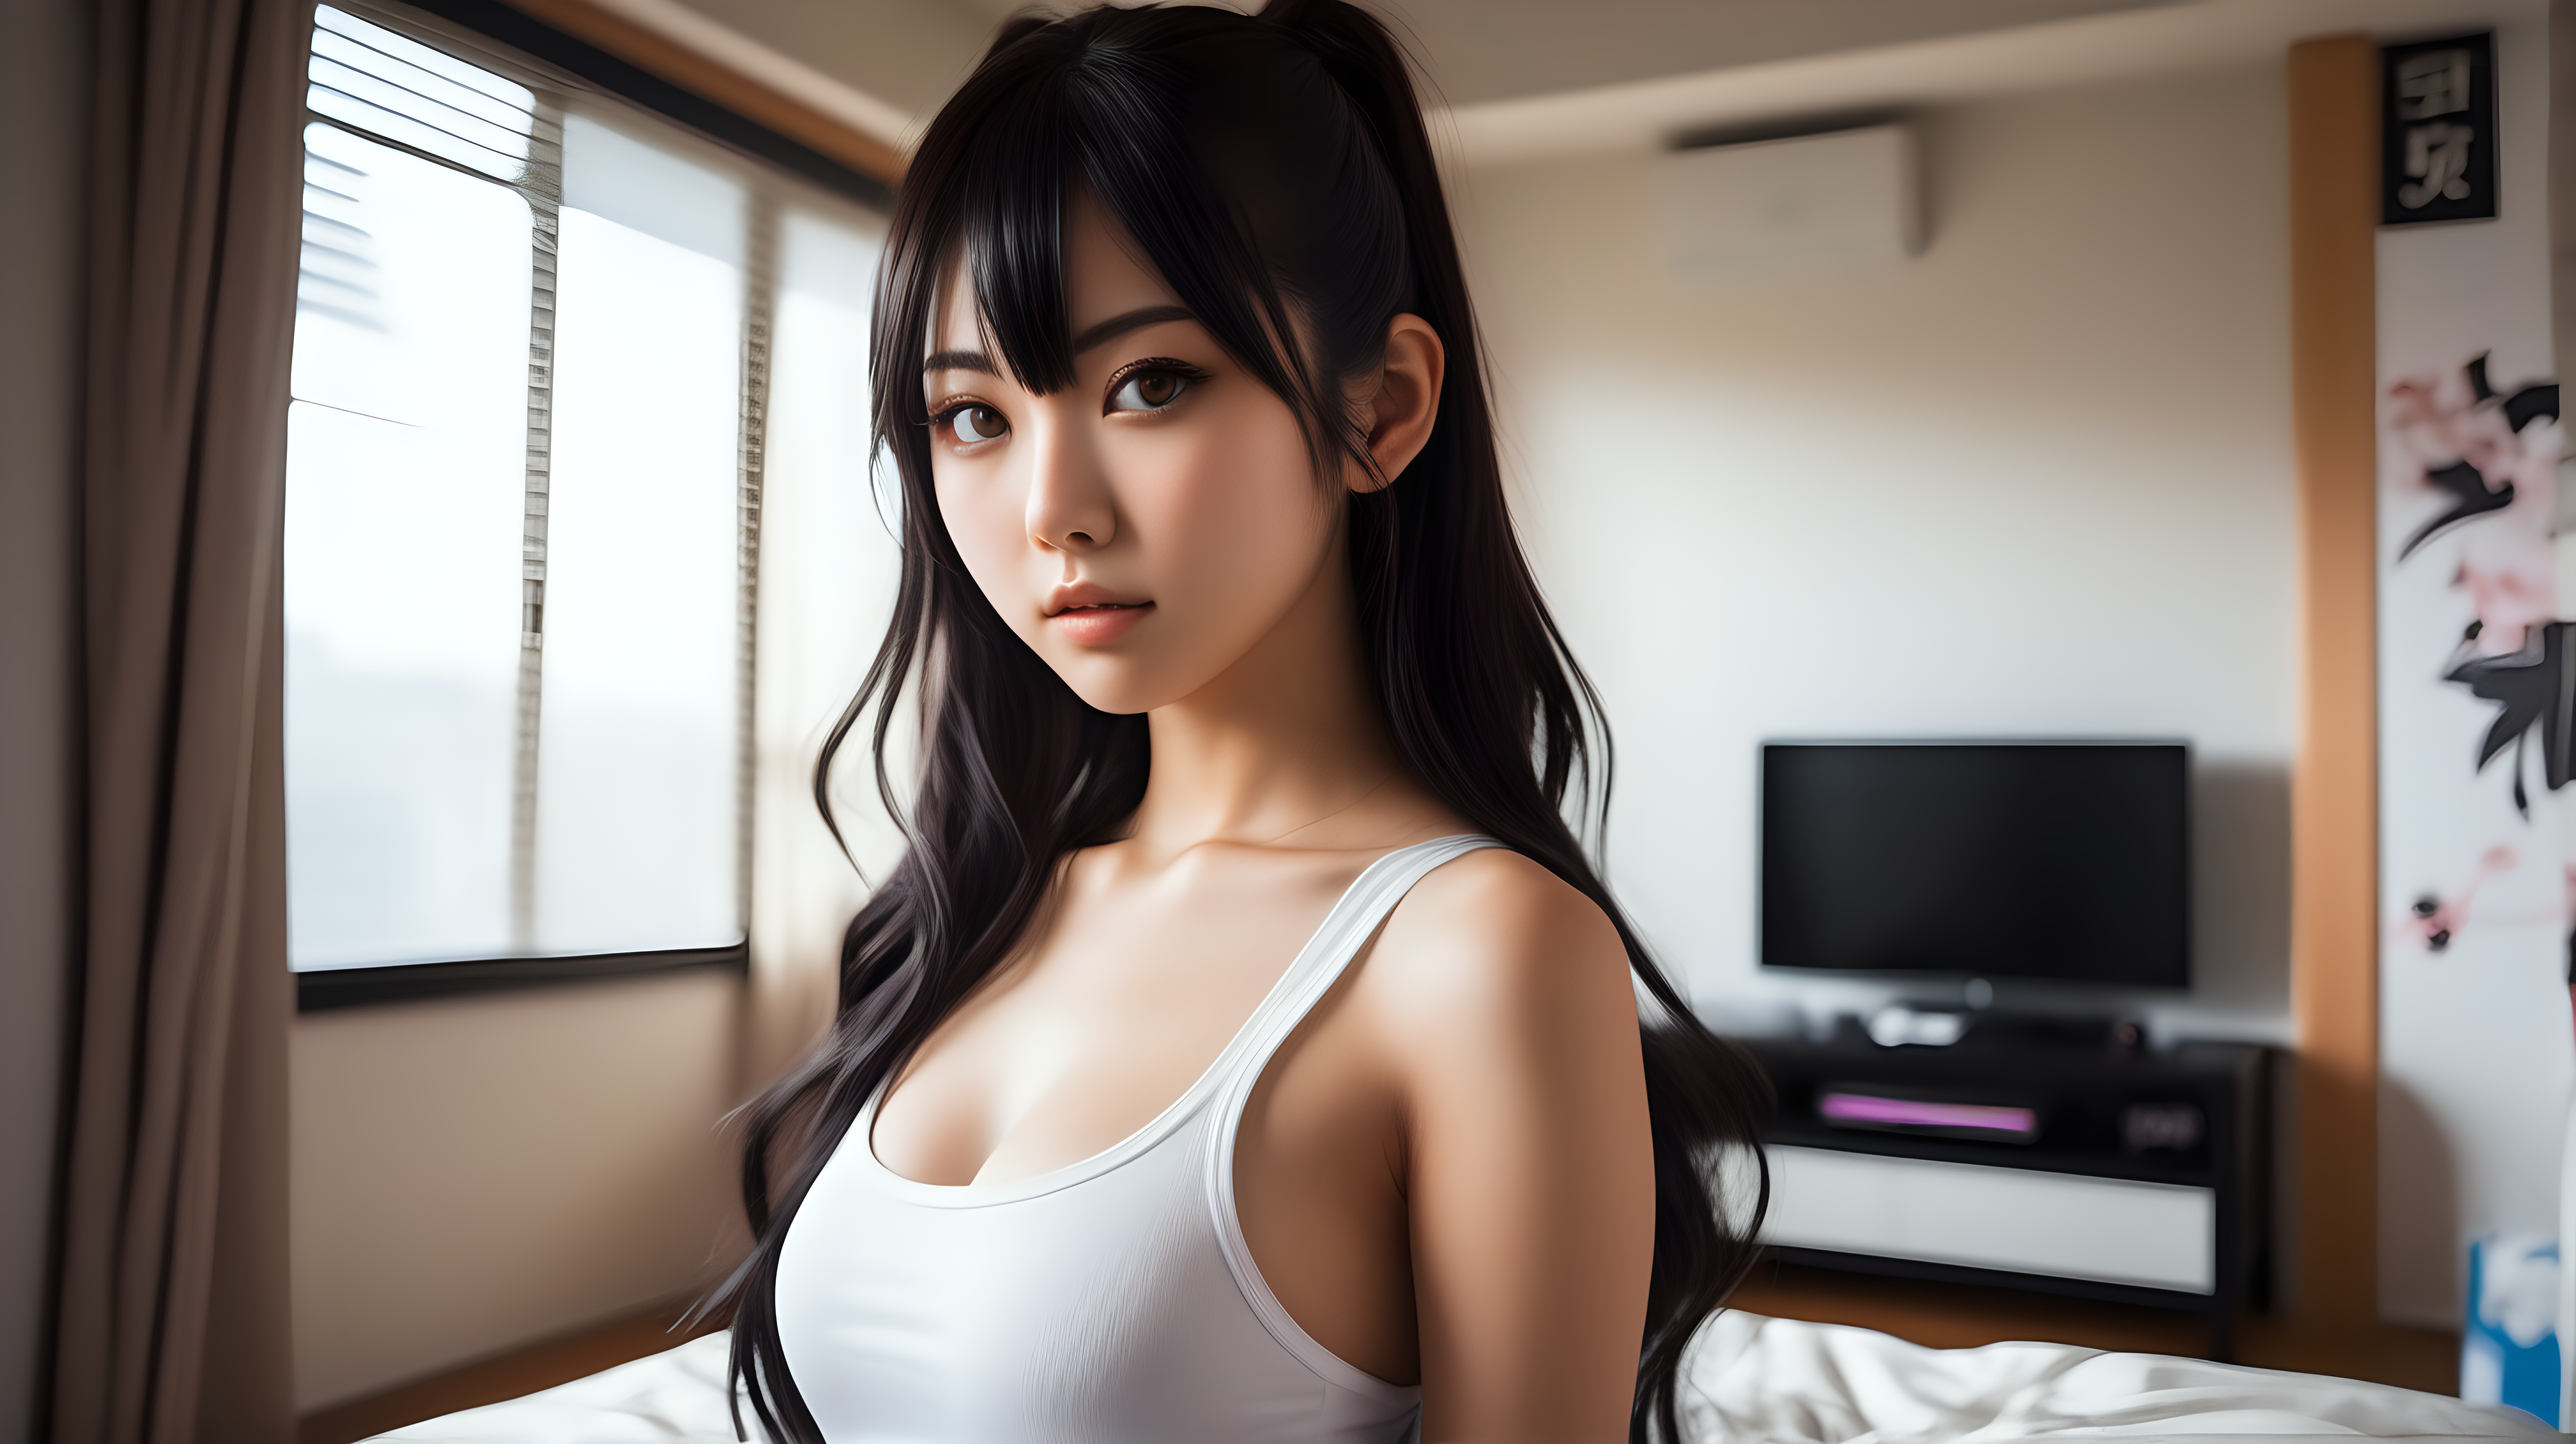 A 25 yo japan woman in a delightful afternoon. She is standing looking at the camera, in a gamer style bedroom. She wears a k-pop look nsfw. This photography is the best representation of female beauty, shiny dark hair, hazel eyes, big tits. Extremely realistic textures and warm colors give the final touch. Sharp focus and realistic shadows add to the scene.